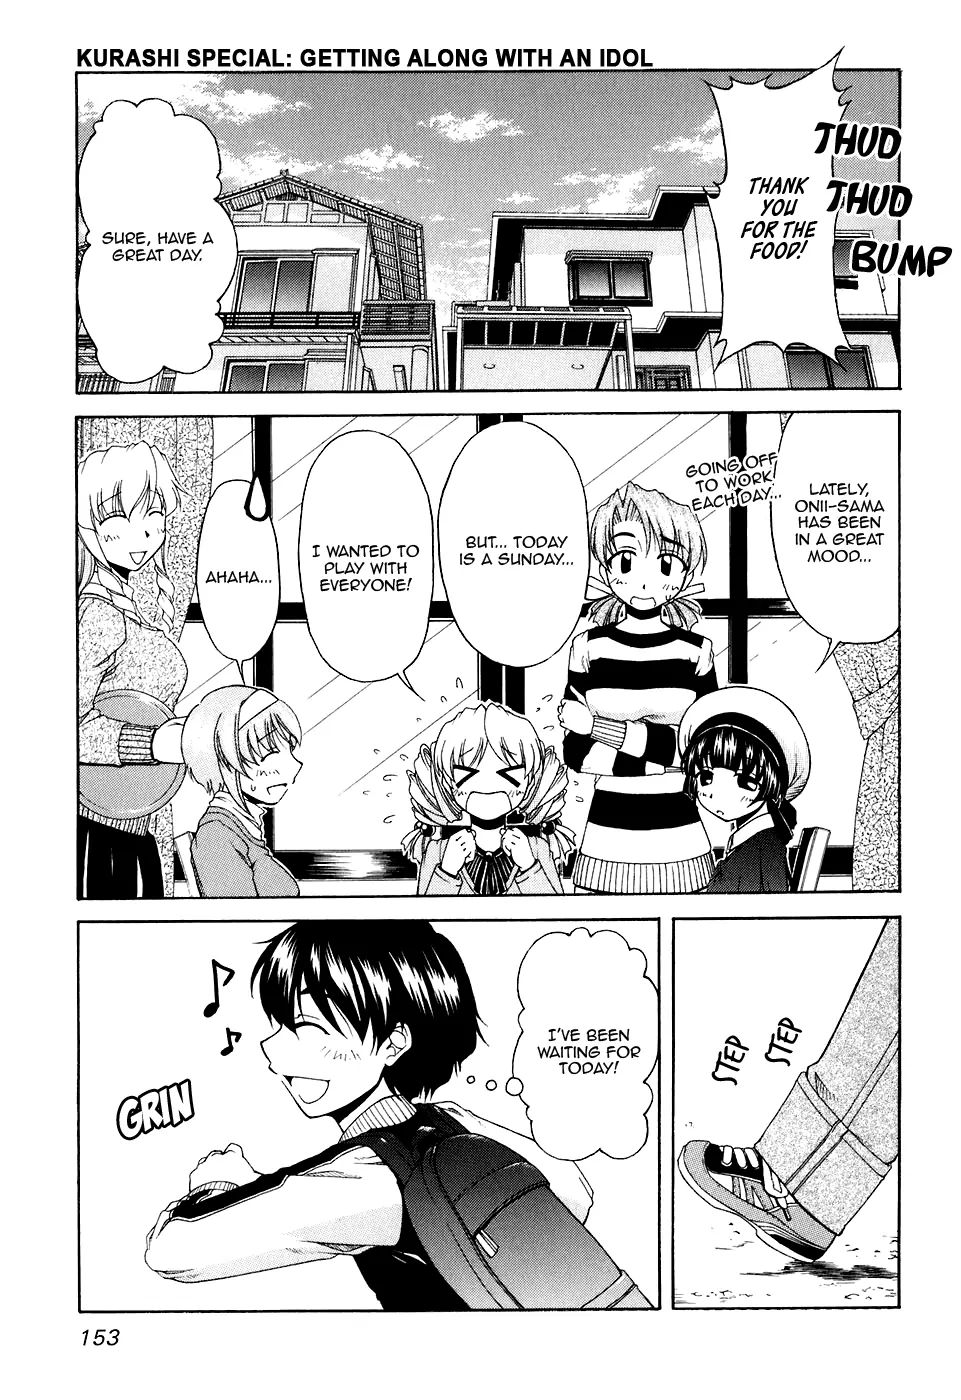 Tona-Gura! Vol.7 Chapter 47.1: Special: Getting Along With an Idol